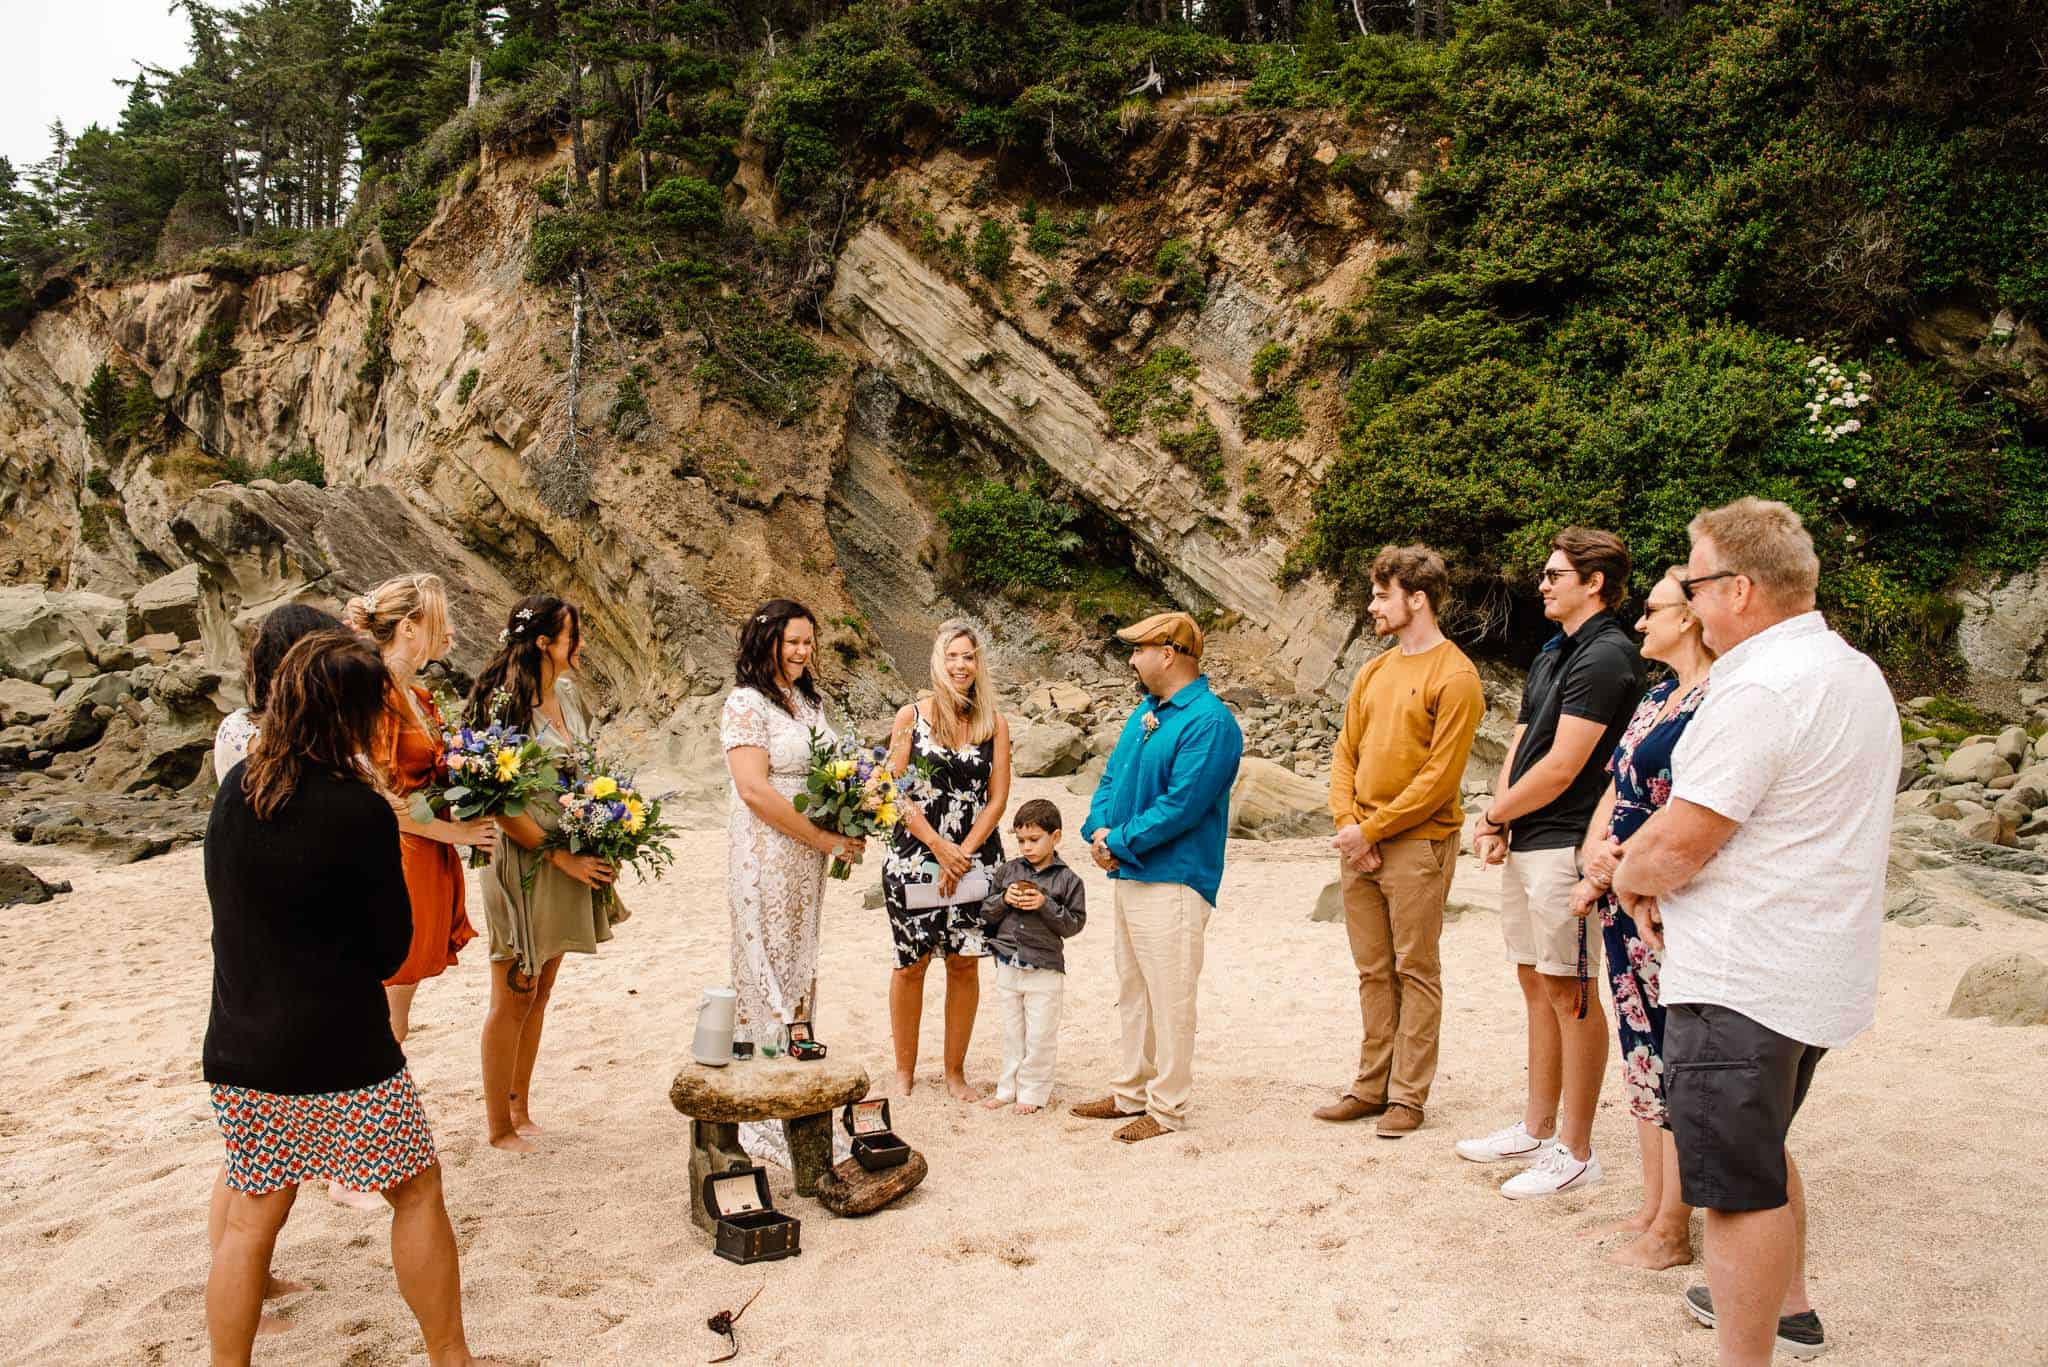 couple eloping with family standing around them on a sandy beach and cliff in the background